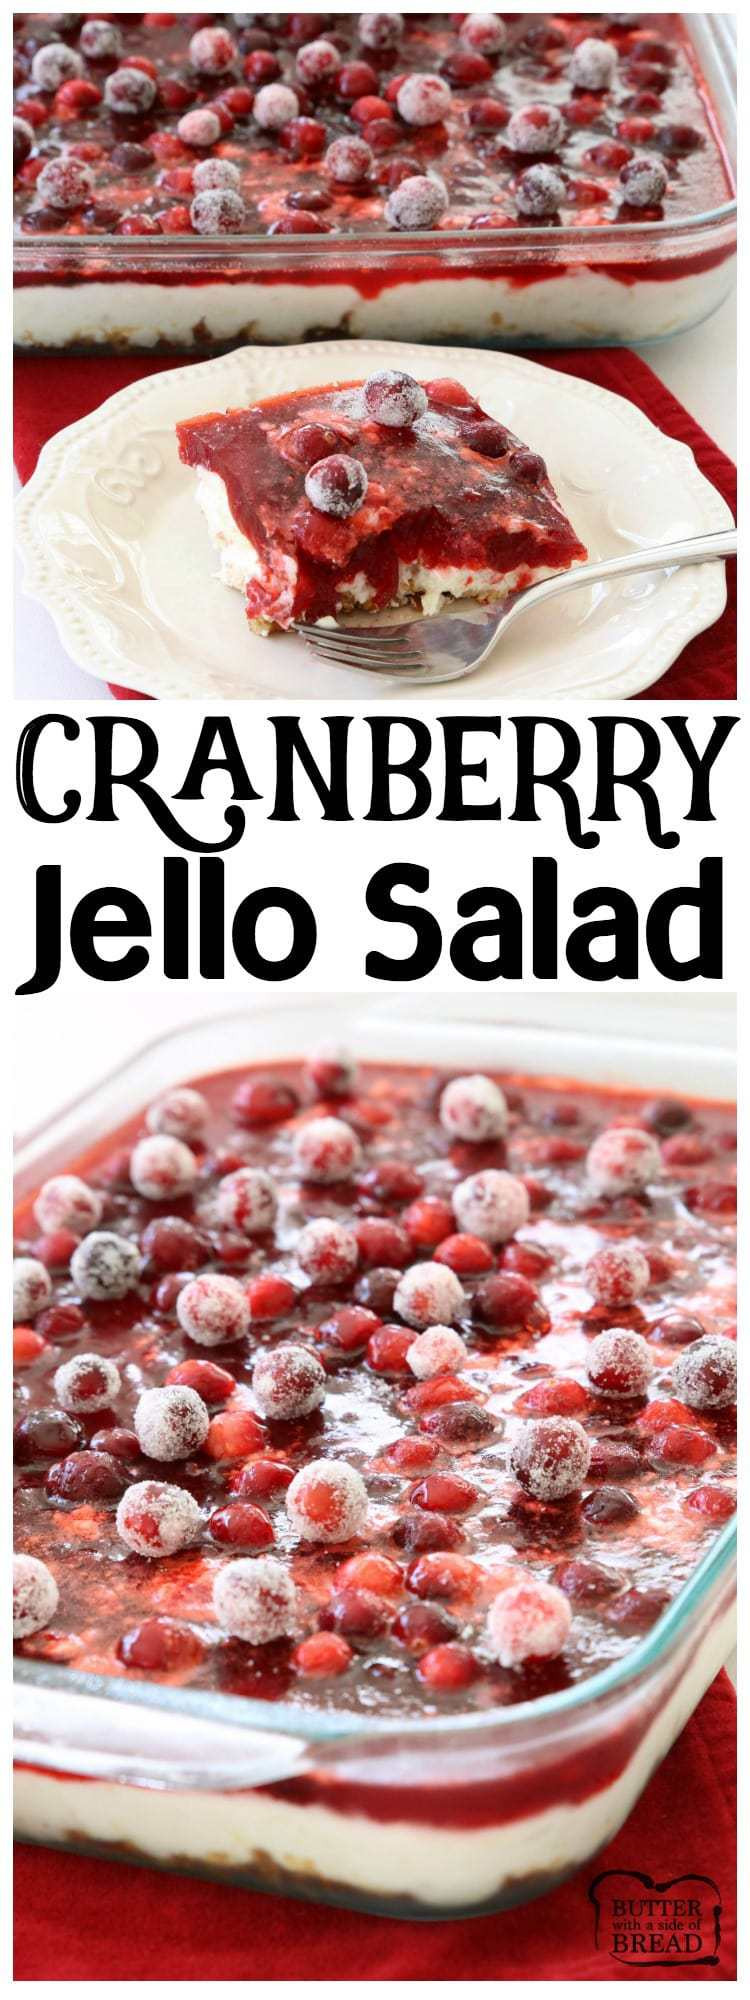 Cranberry Jello Salad Recipes Thanksgiving
 CRANBERRY JELLO SALAD Butter with a Side of Bread